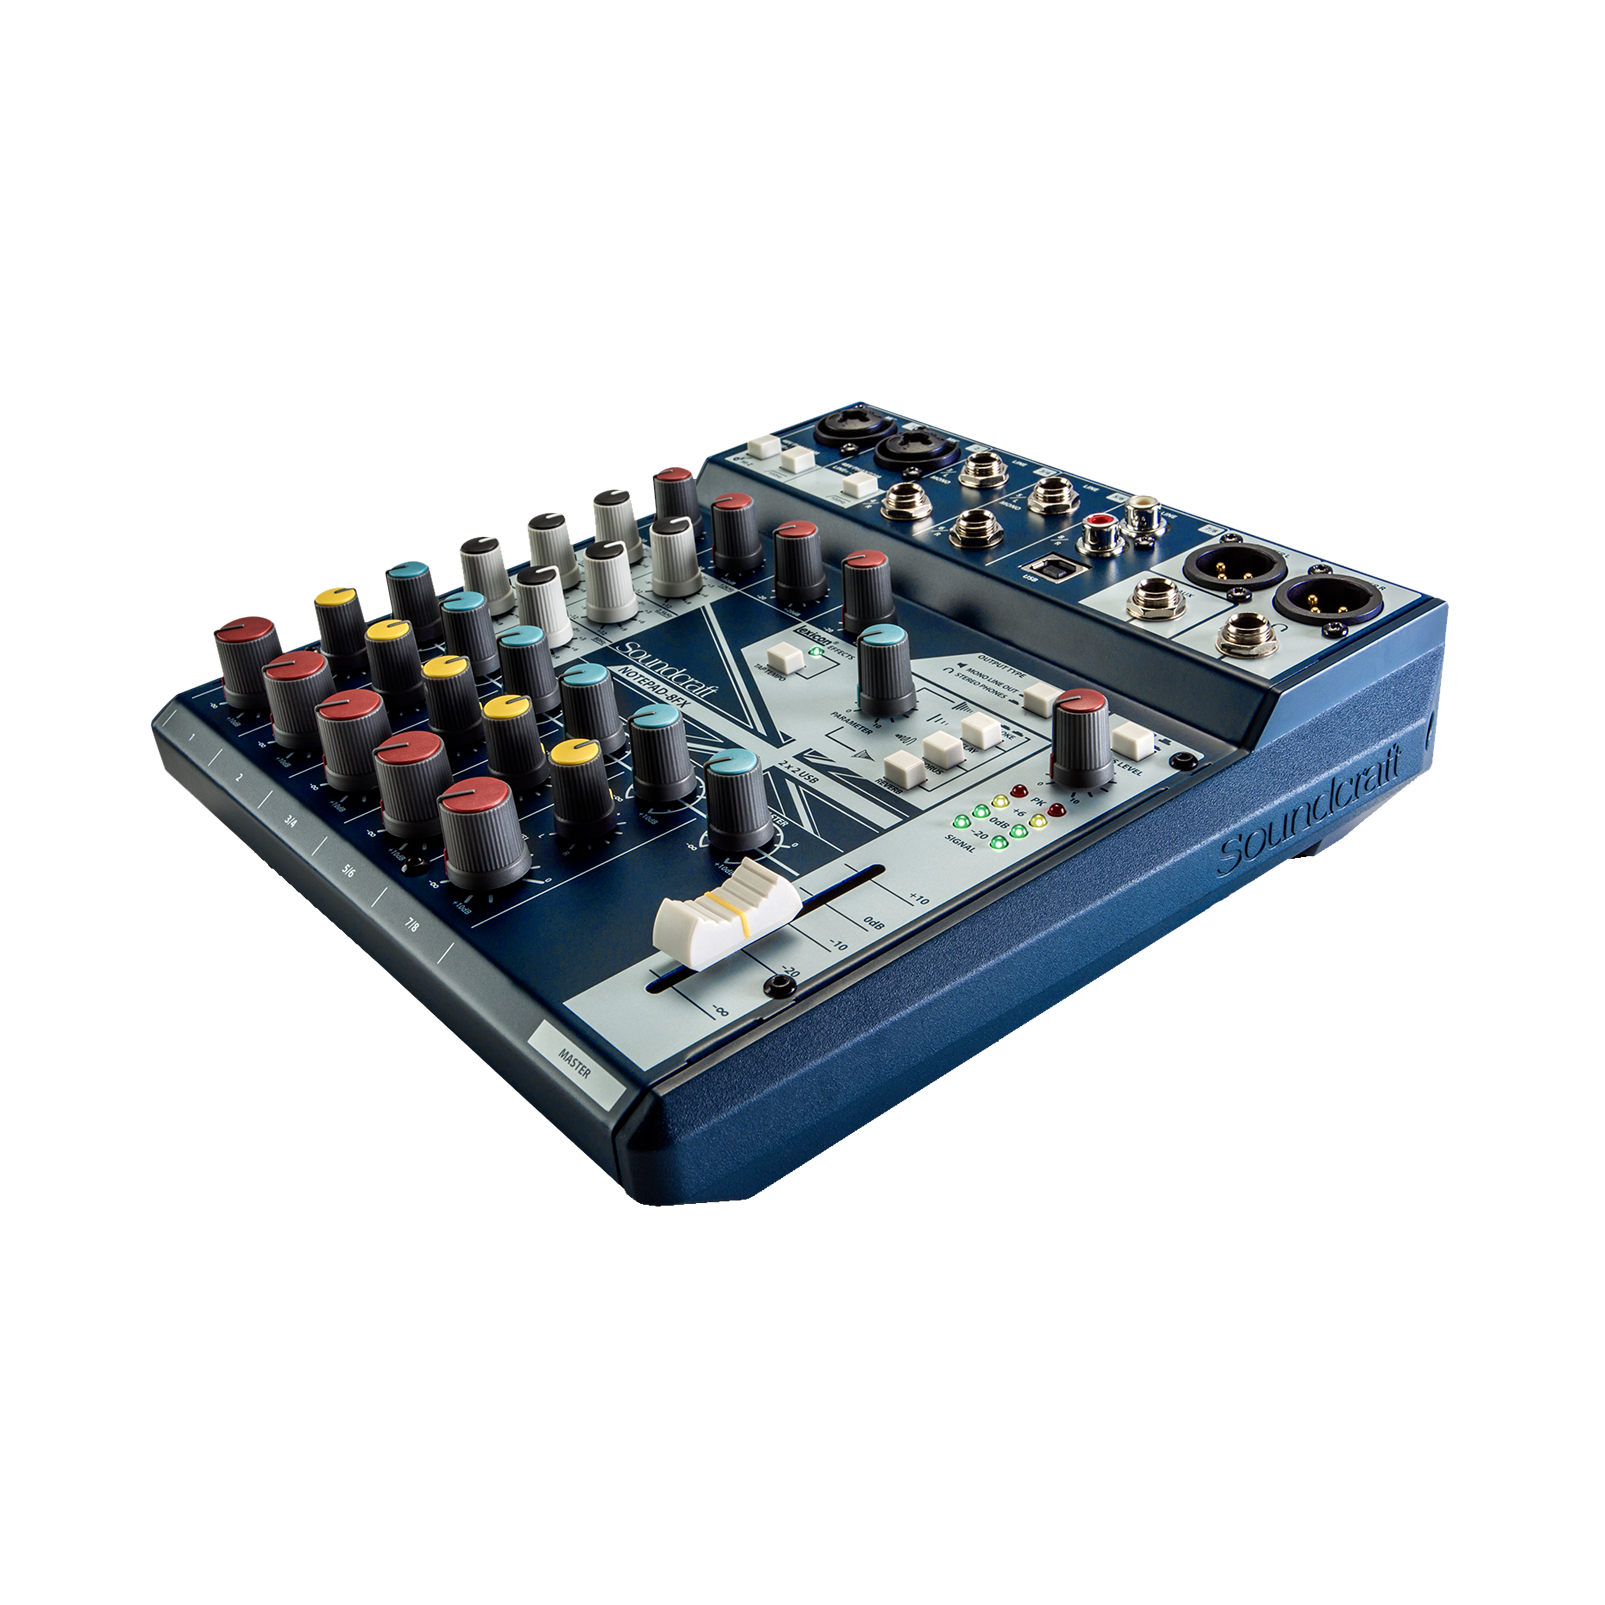 Notepad-8FX - Dark Blue - Small-format analog mixing console with USB I/O and Lexicon effects - Detailshot 1